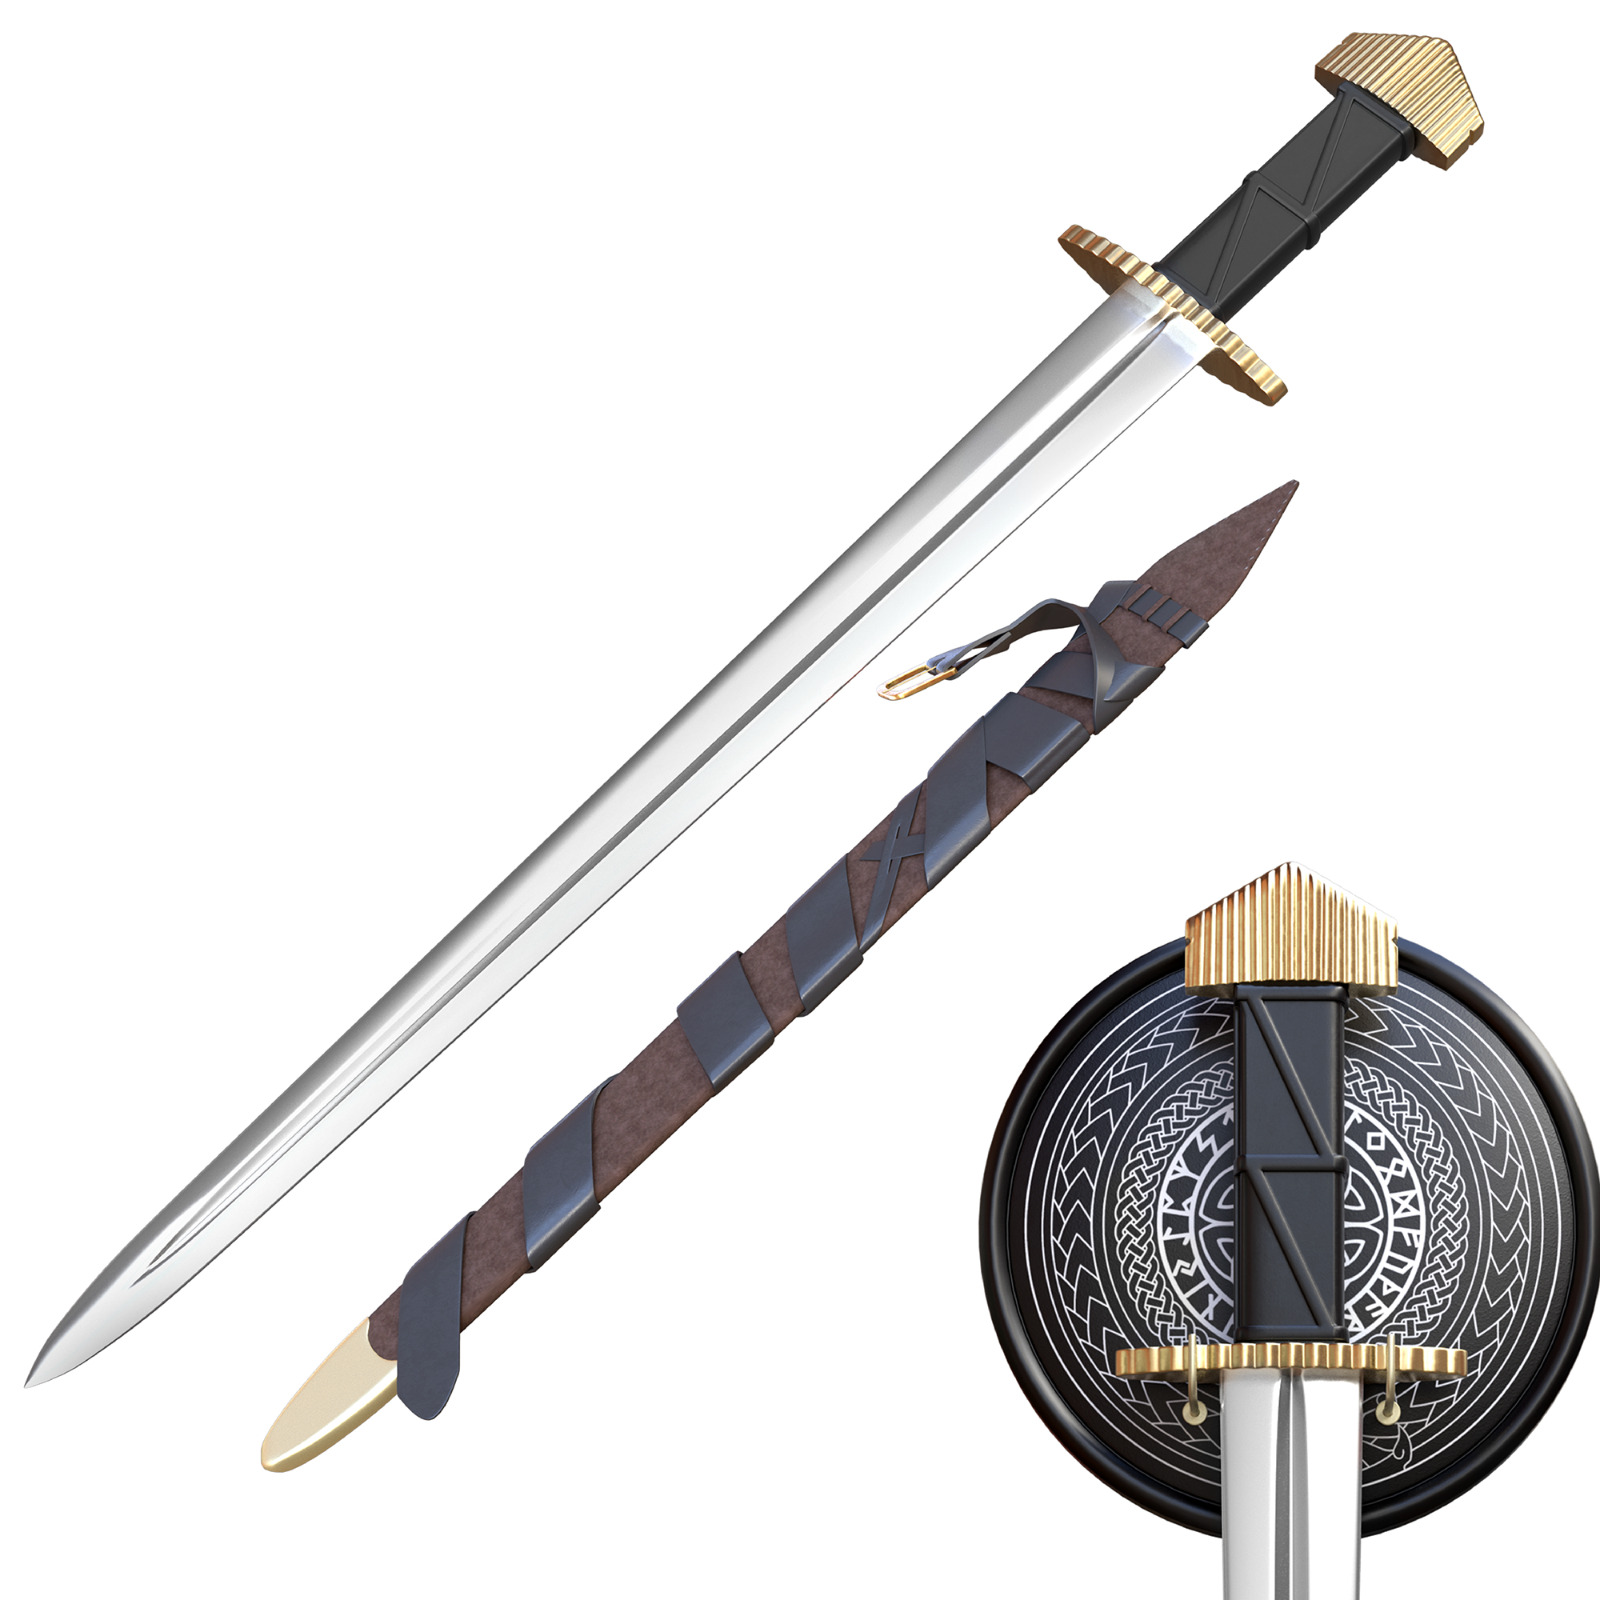 Viking Culture Sword - Battle Ready Weapons for LARP Play & Medieval Reenactment